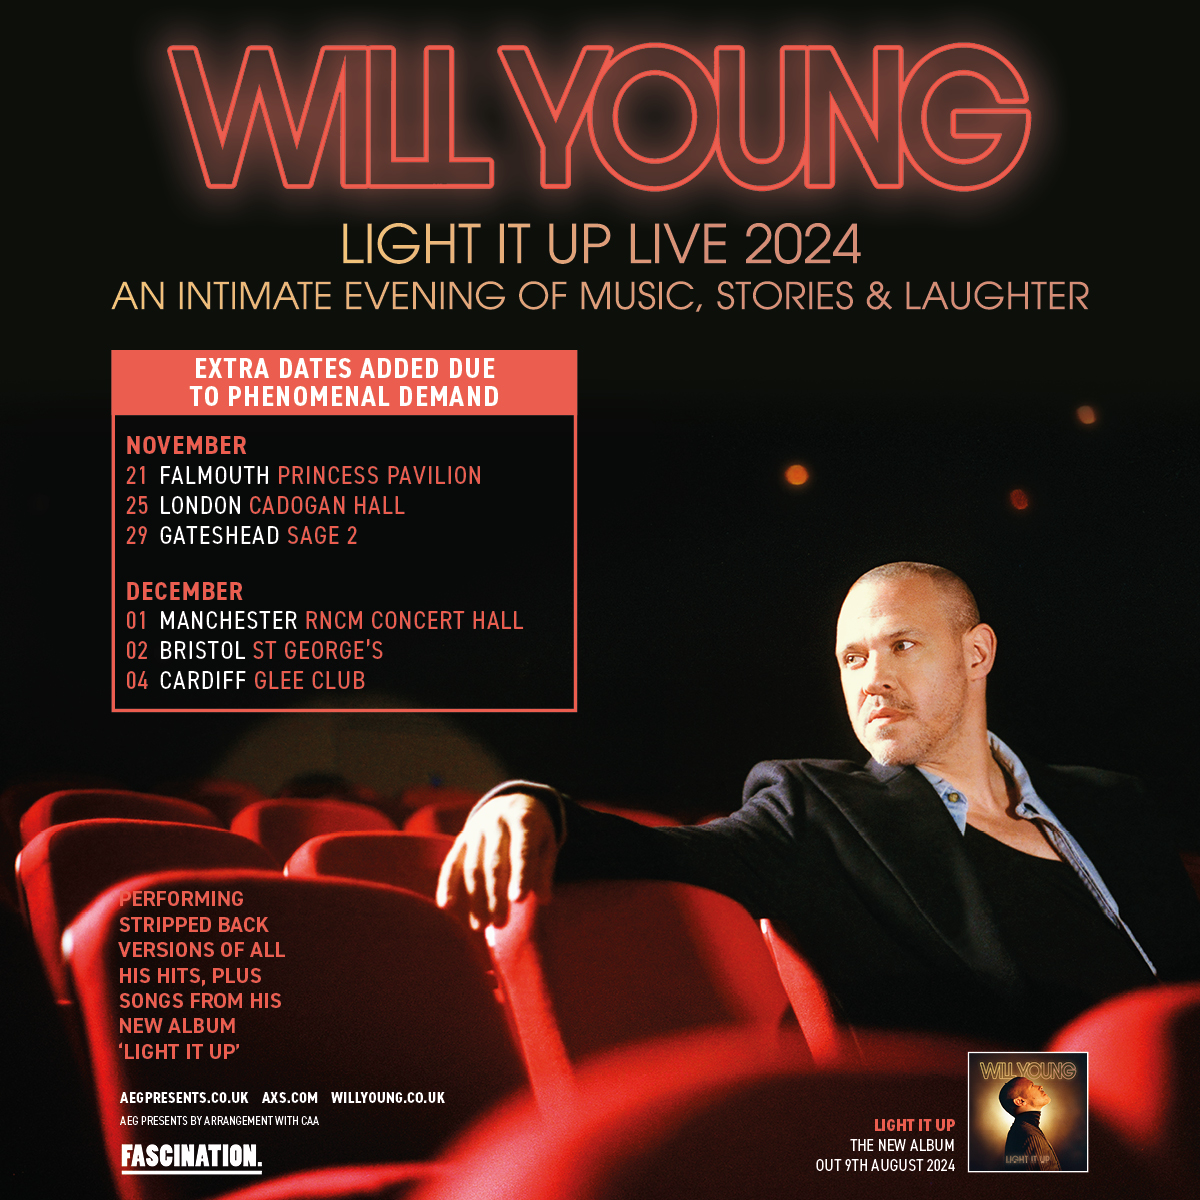 EXTRA DATES ADDED! @willyoung | Light It Up Live 2024 Tickets on sale now! aegp.uk/WillYoung